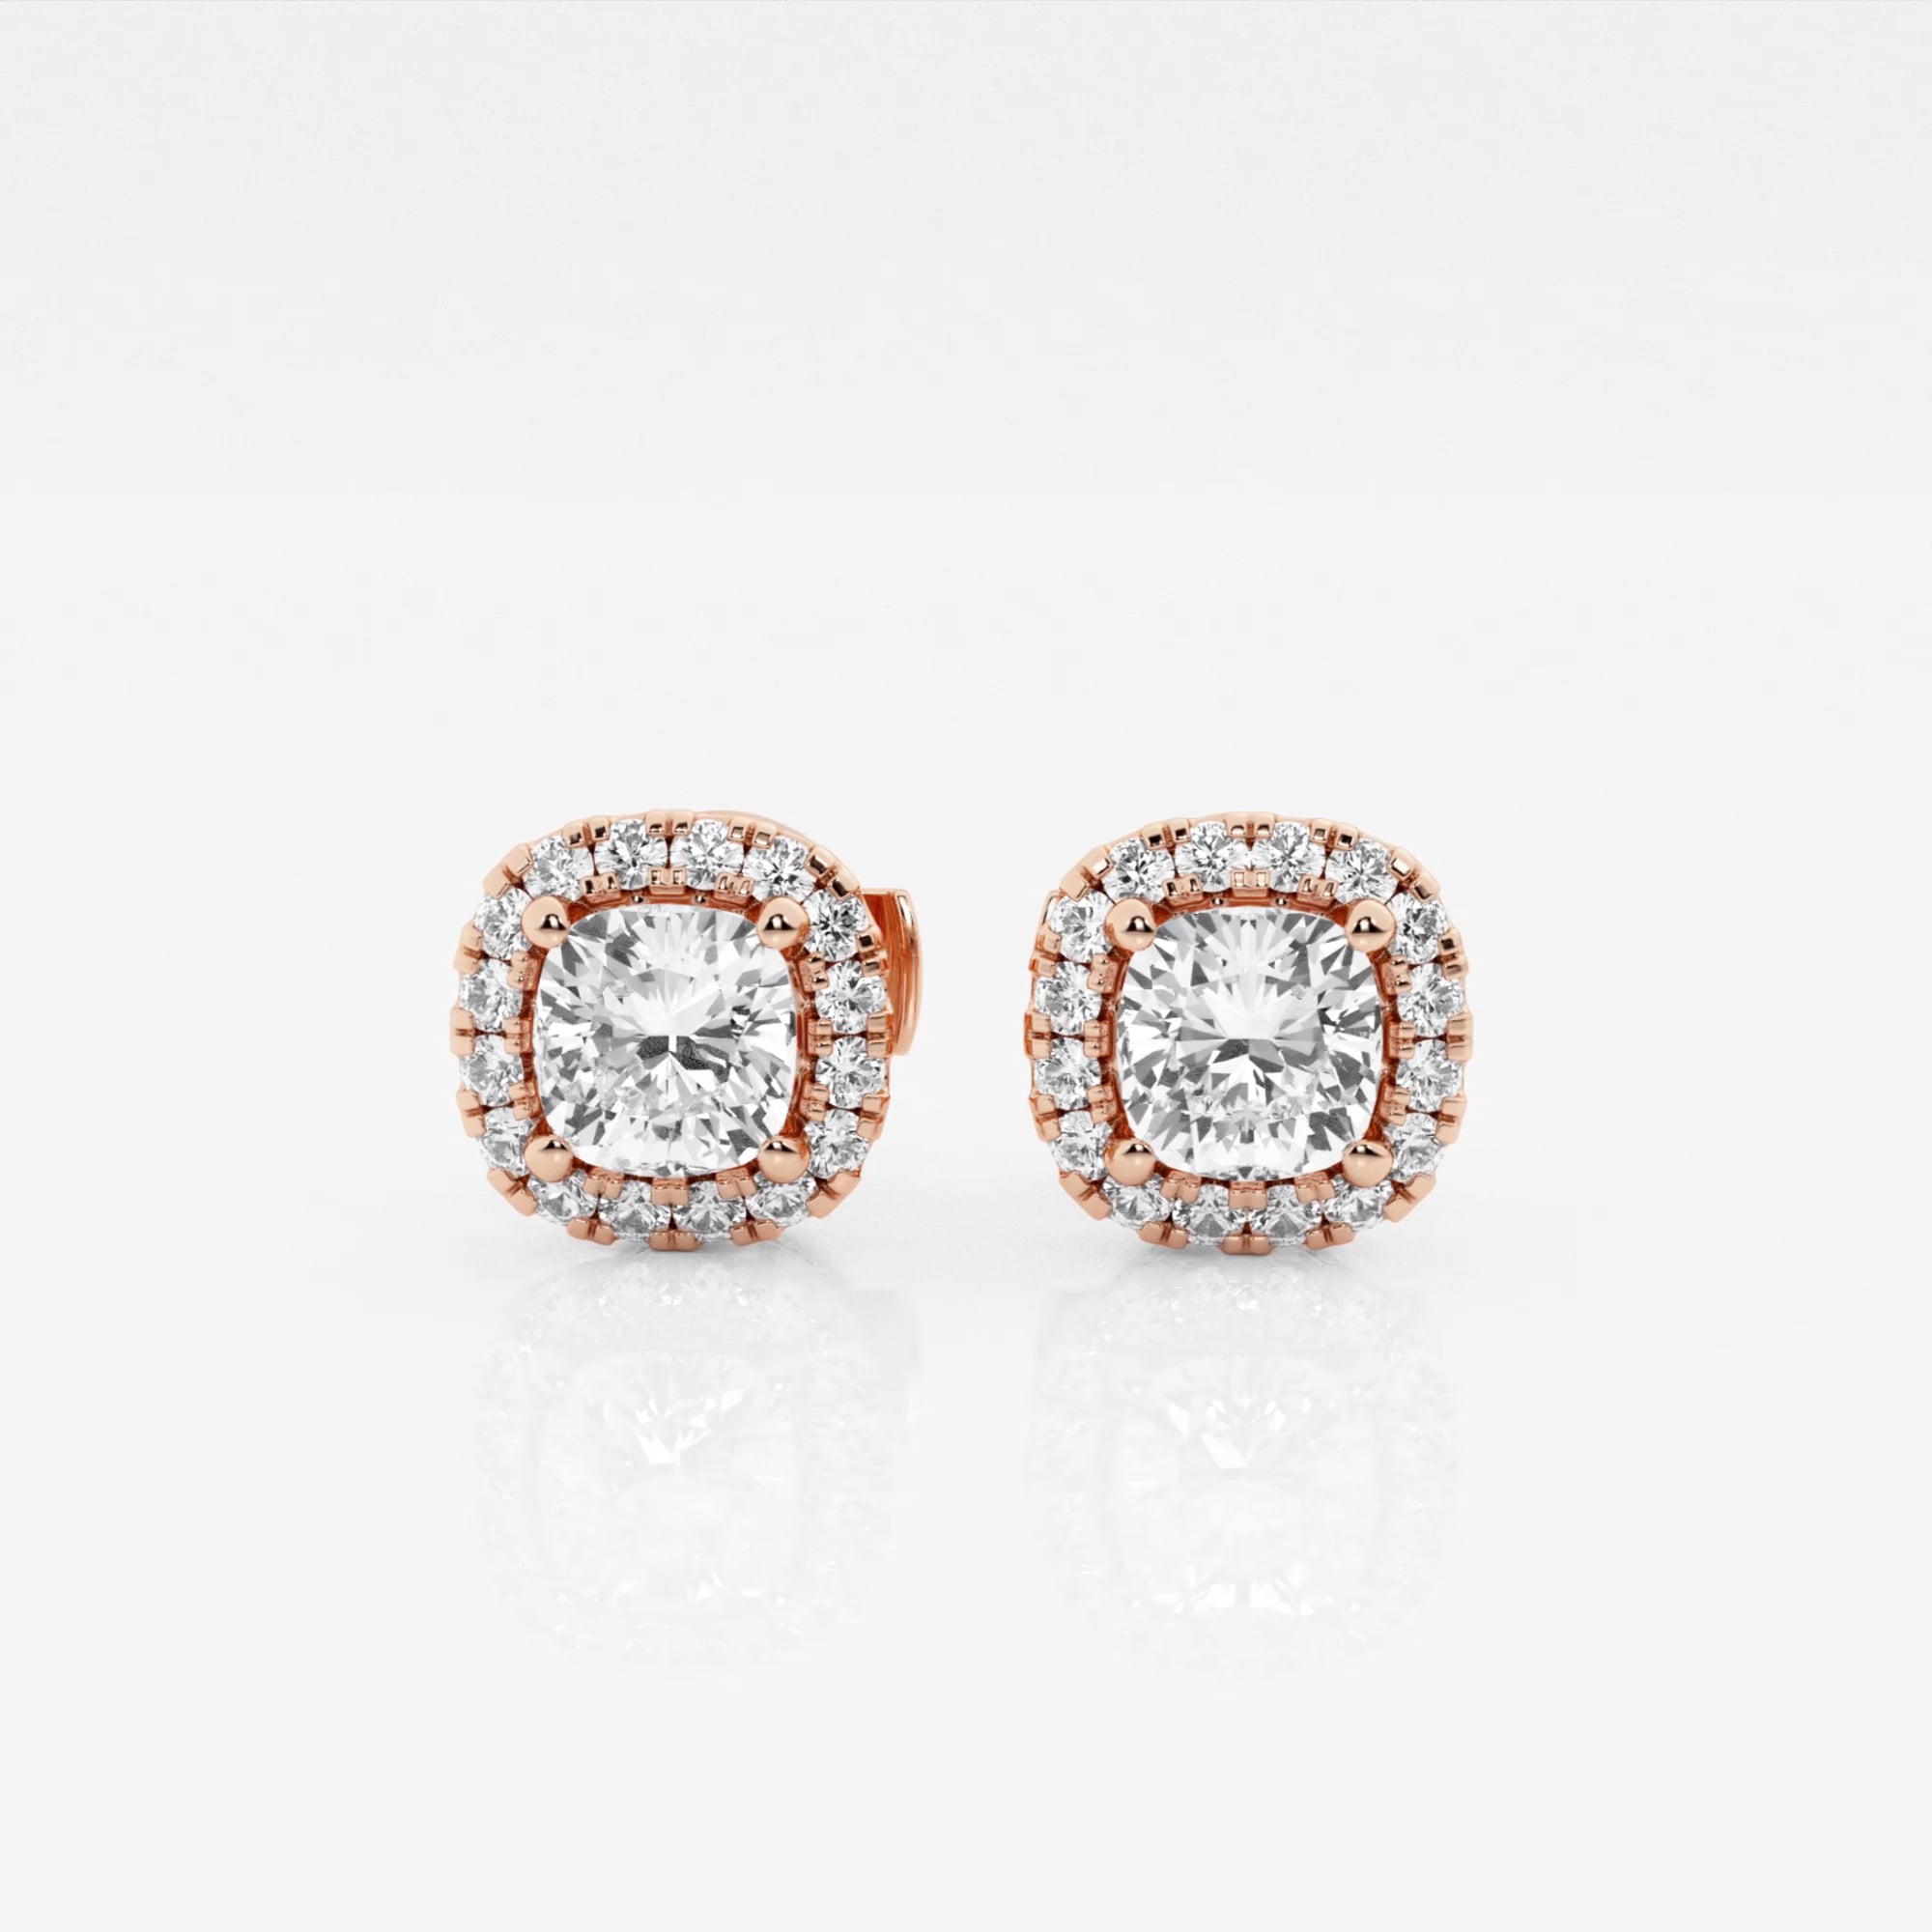 product video for 1 1/5 ctw Cushion Lab Grown Diamond Halo Stud Earrings